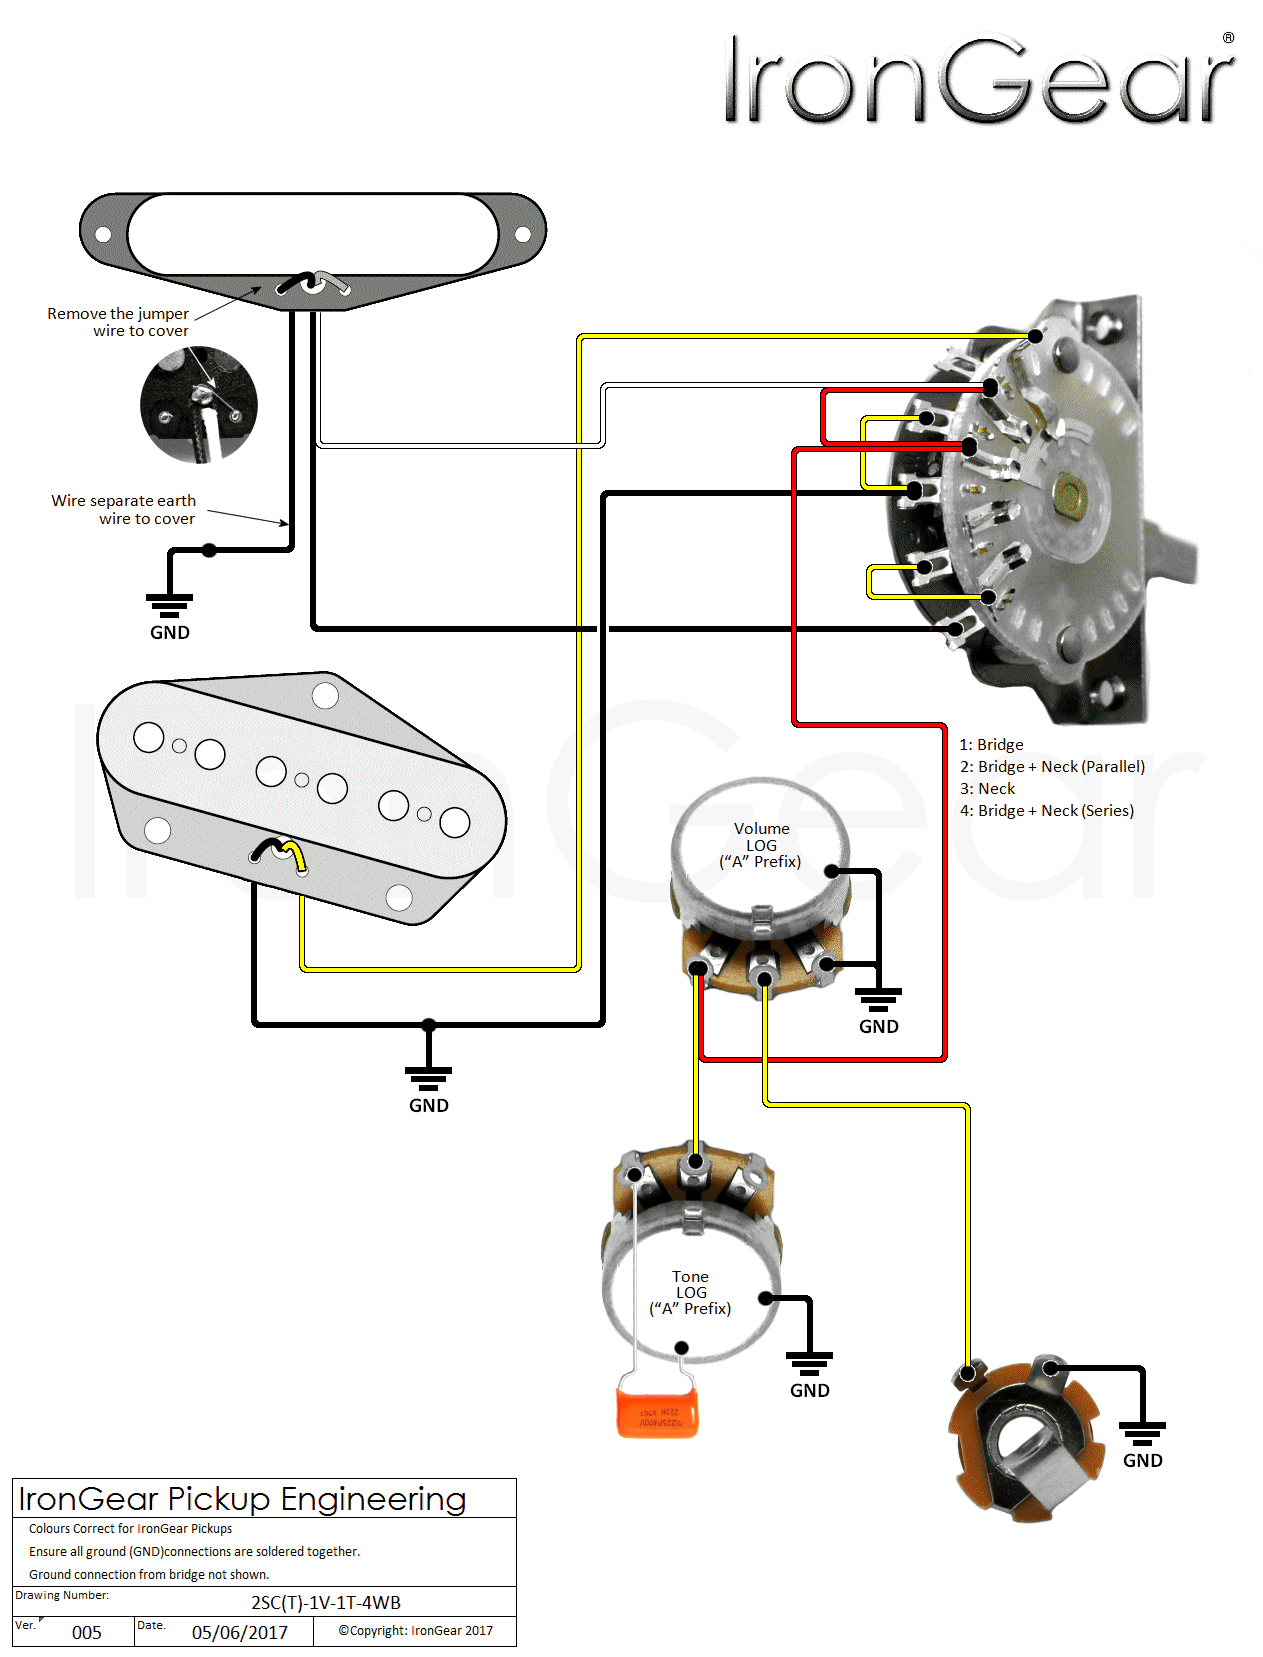 Cheap 3 Way Telecaster Switch Wiring Diagram from www.irongear.co.uk